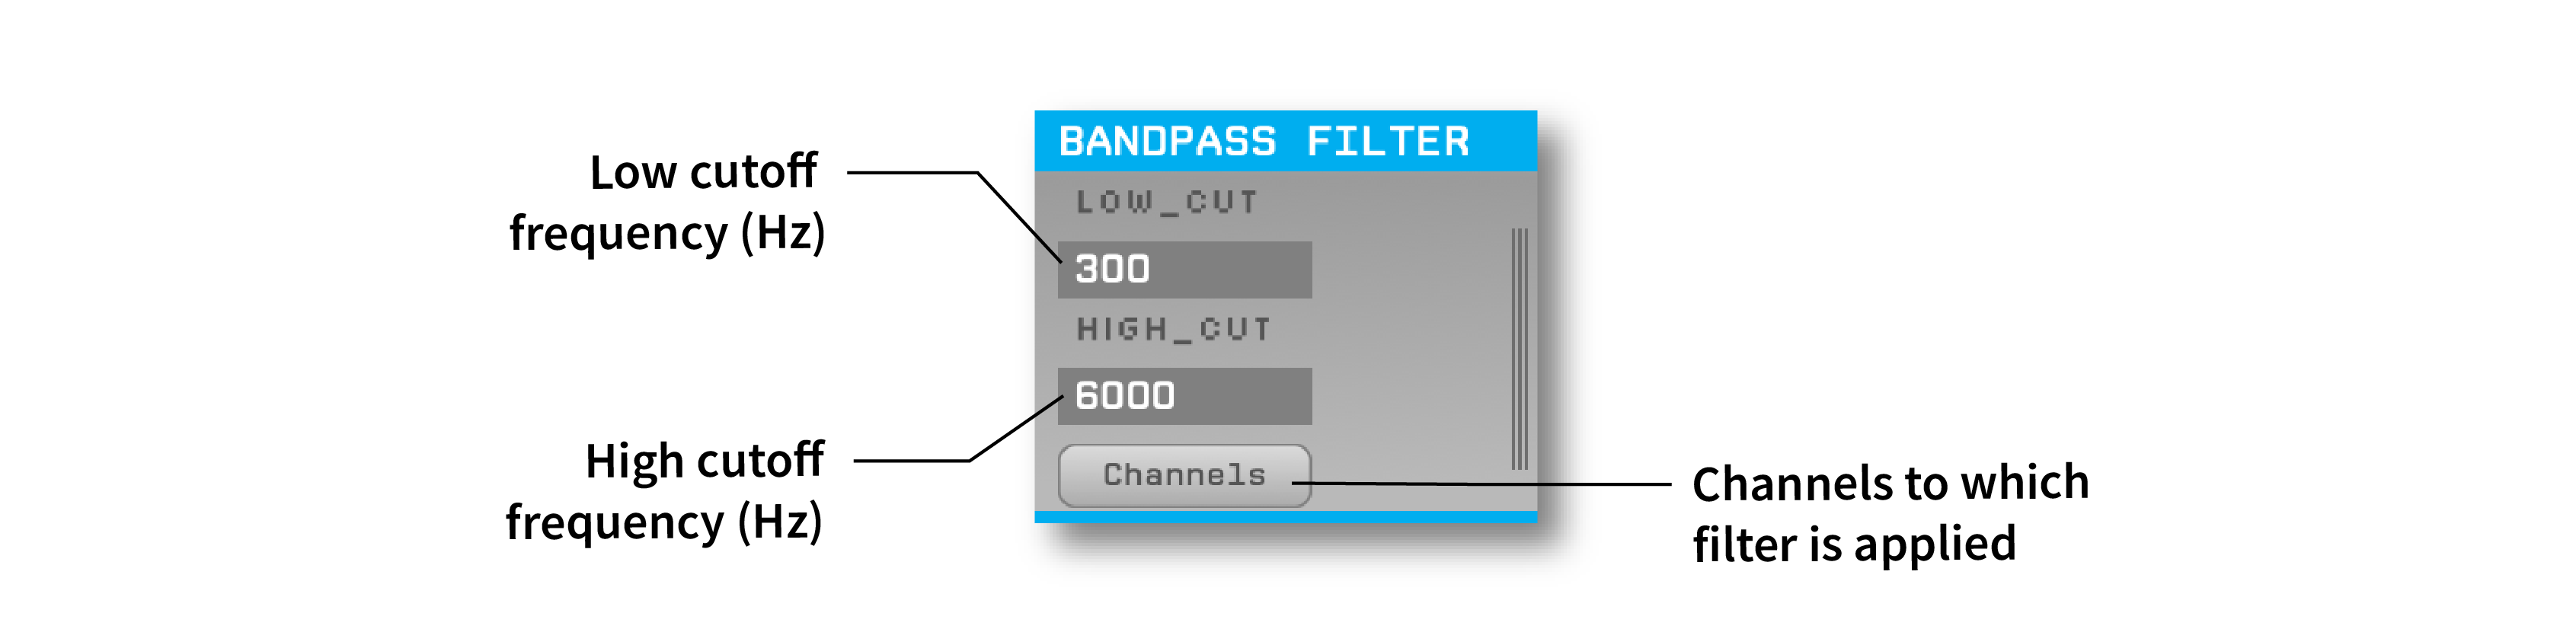 Annotated Bandpass Filter settings interface